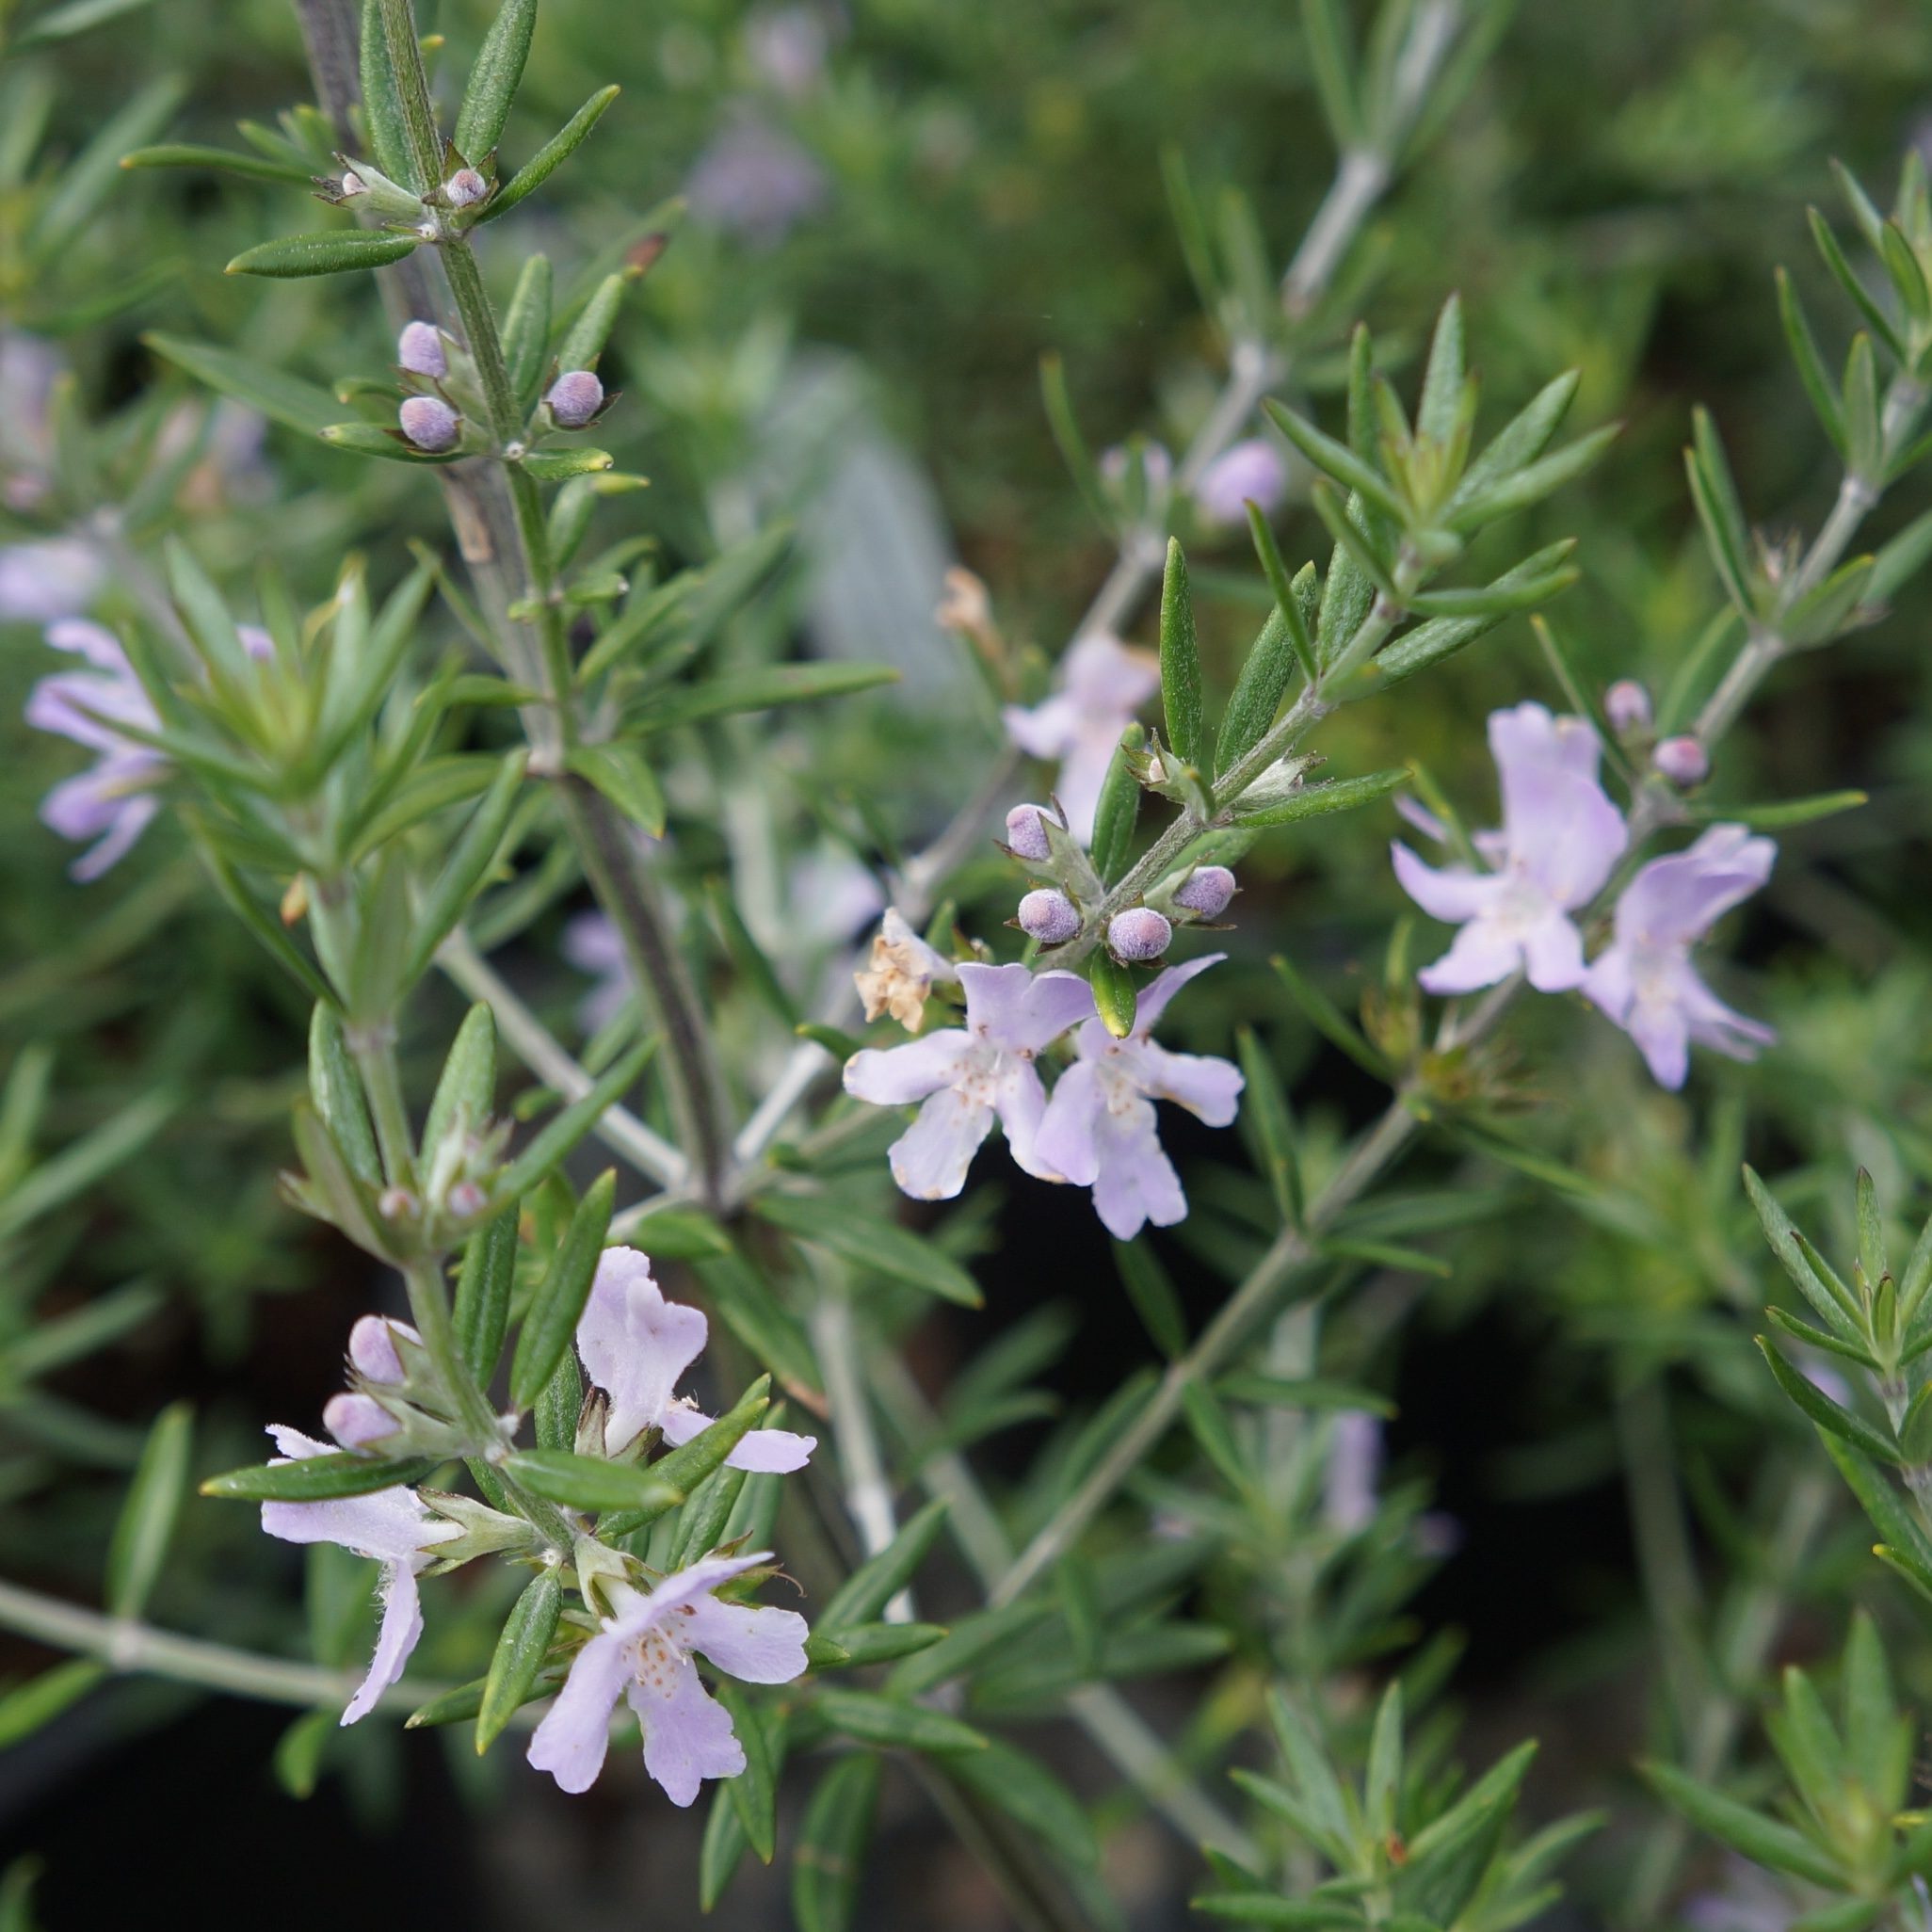 Plant with small green leaves and pale purple flowers